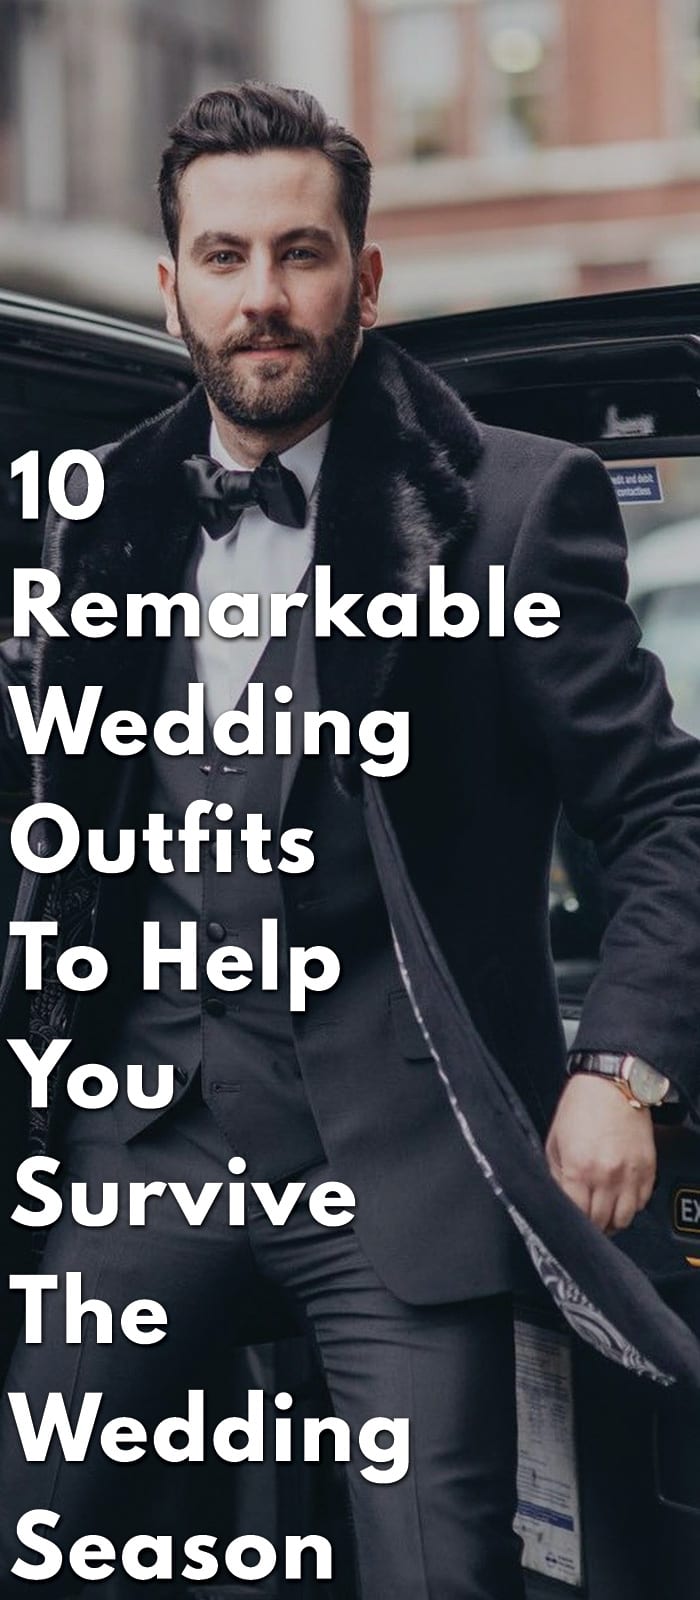 10-Remarkable-Wedding-Outfits-to-Help-You-Survive-the-Wedding-Season